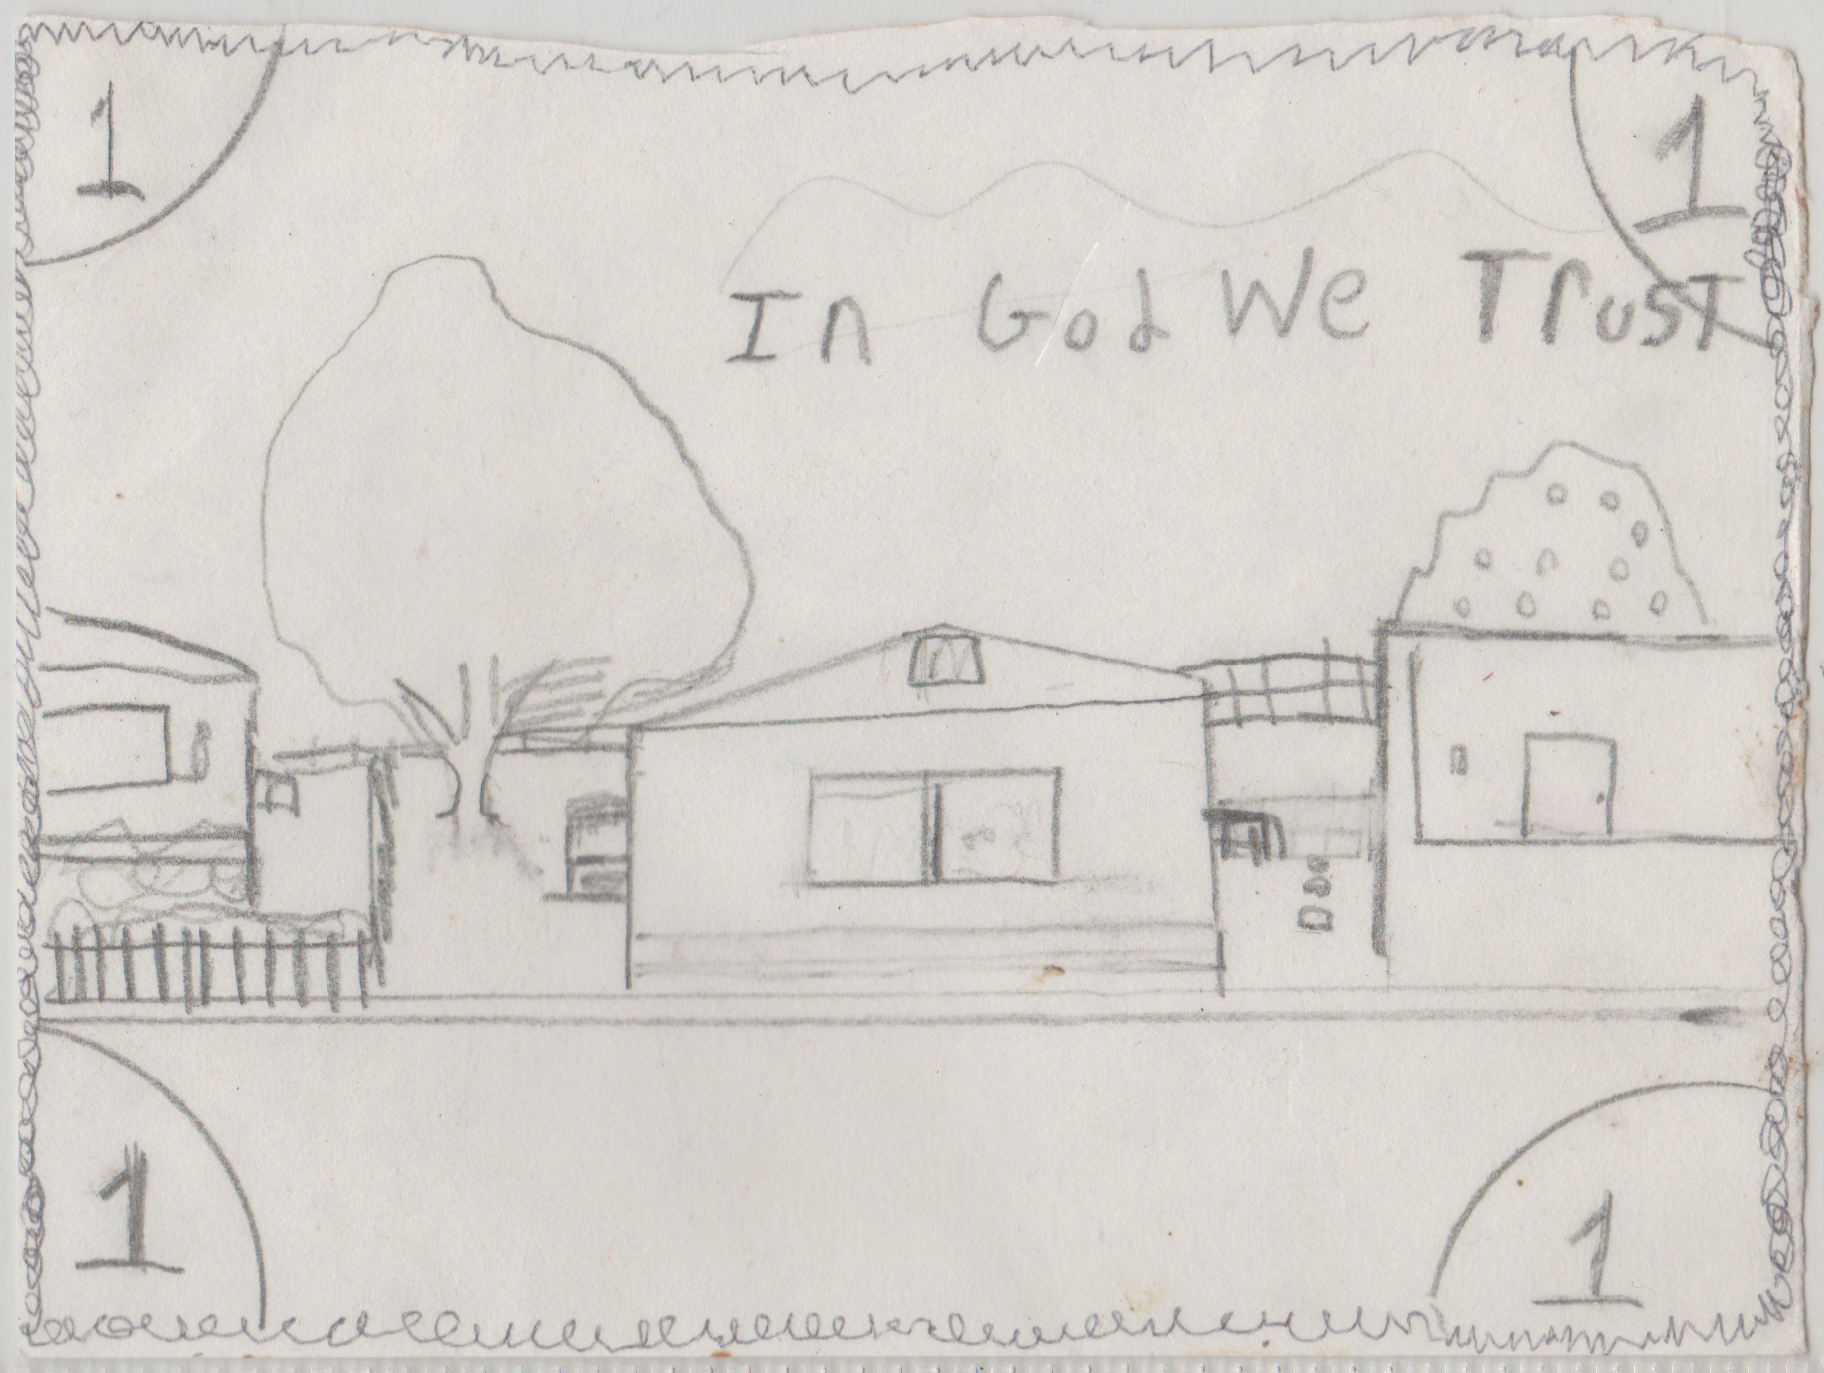 1998-10-15 - Thursday - Joey Money - 1-dollar bill, In God We Trust, 163 Trailer House, October if 1998, Joey Arnold age 13, 1pic.png